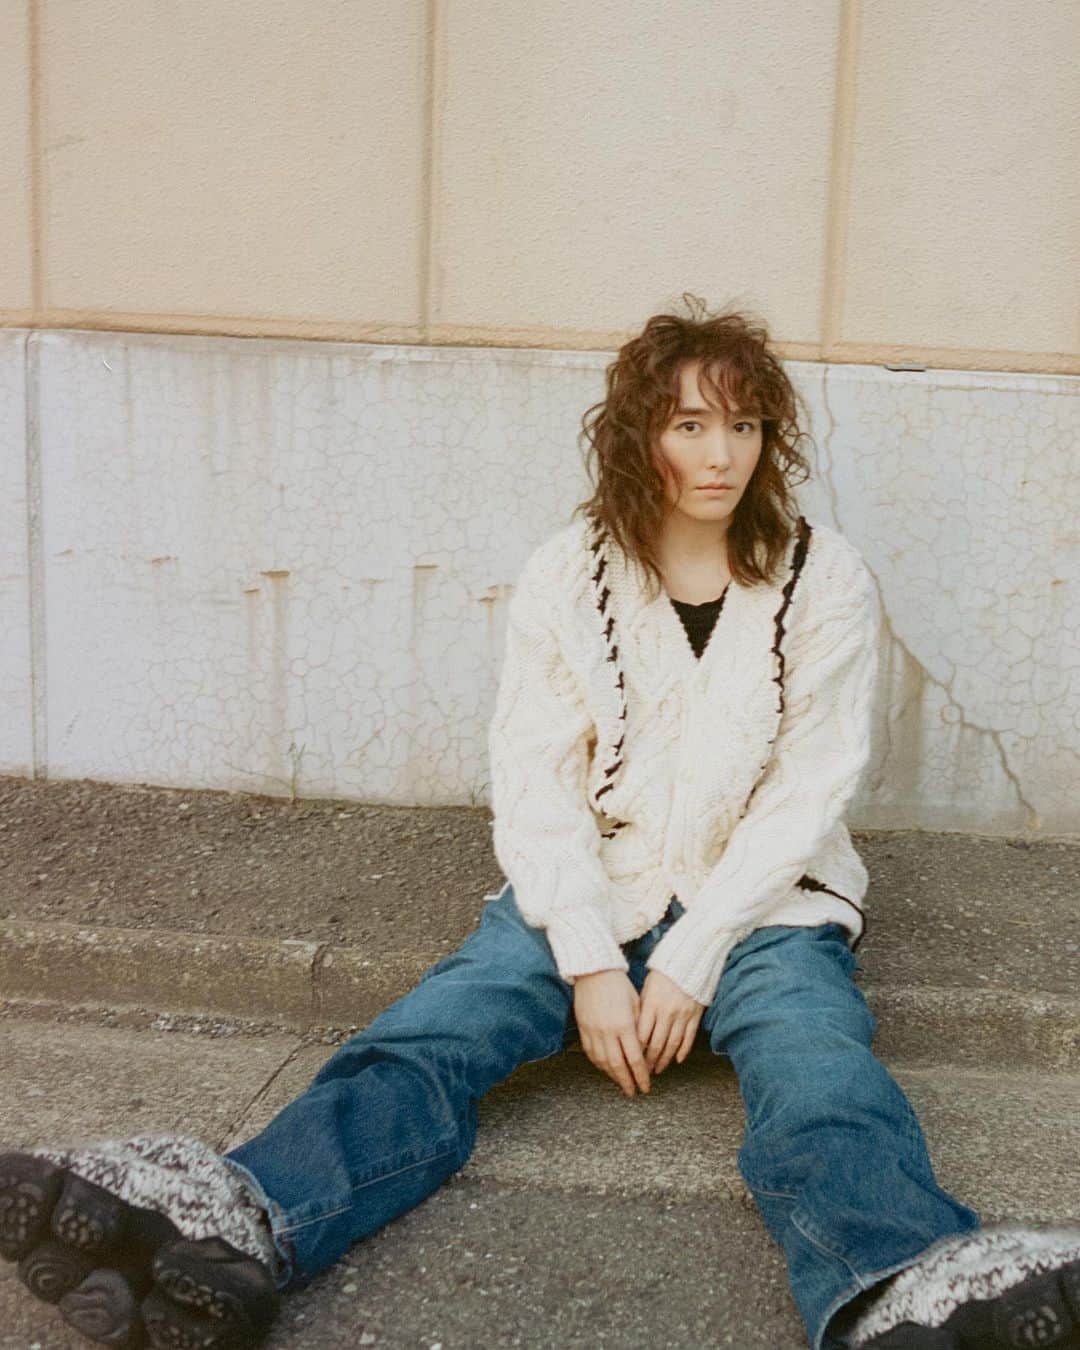 Rumchéのインスタグラム：「#YuiAragaki in cable knit & remake denim  DEW Magazine #48 Joy Issue Fall 2023  Photography @kisshomaru  Styling @kaori_912  Hair @miho_emo_  Make-up @annamisawa  Casting director @kayaxxi   🔗dewmagazine.com @dewmagazine   #dewmagazine #RUMCHE #新垣結衣」